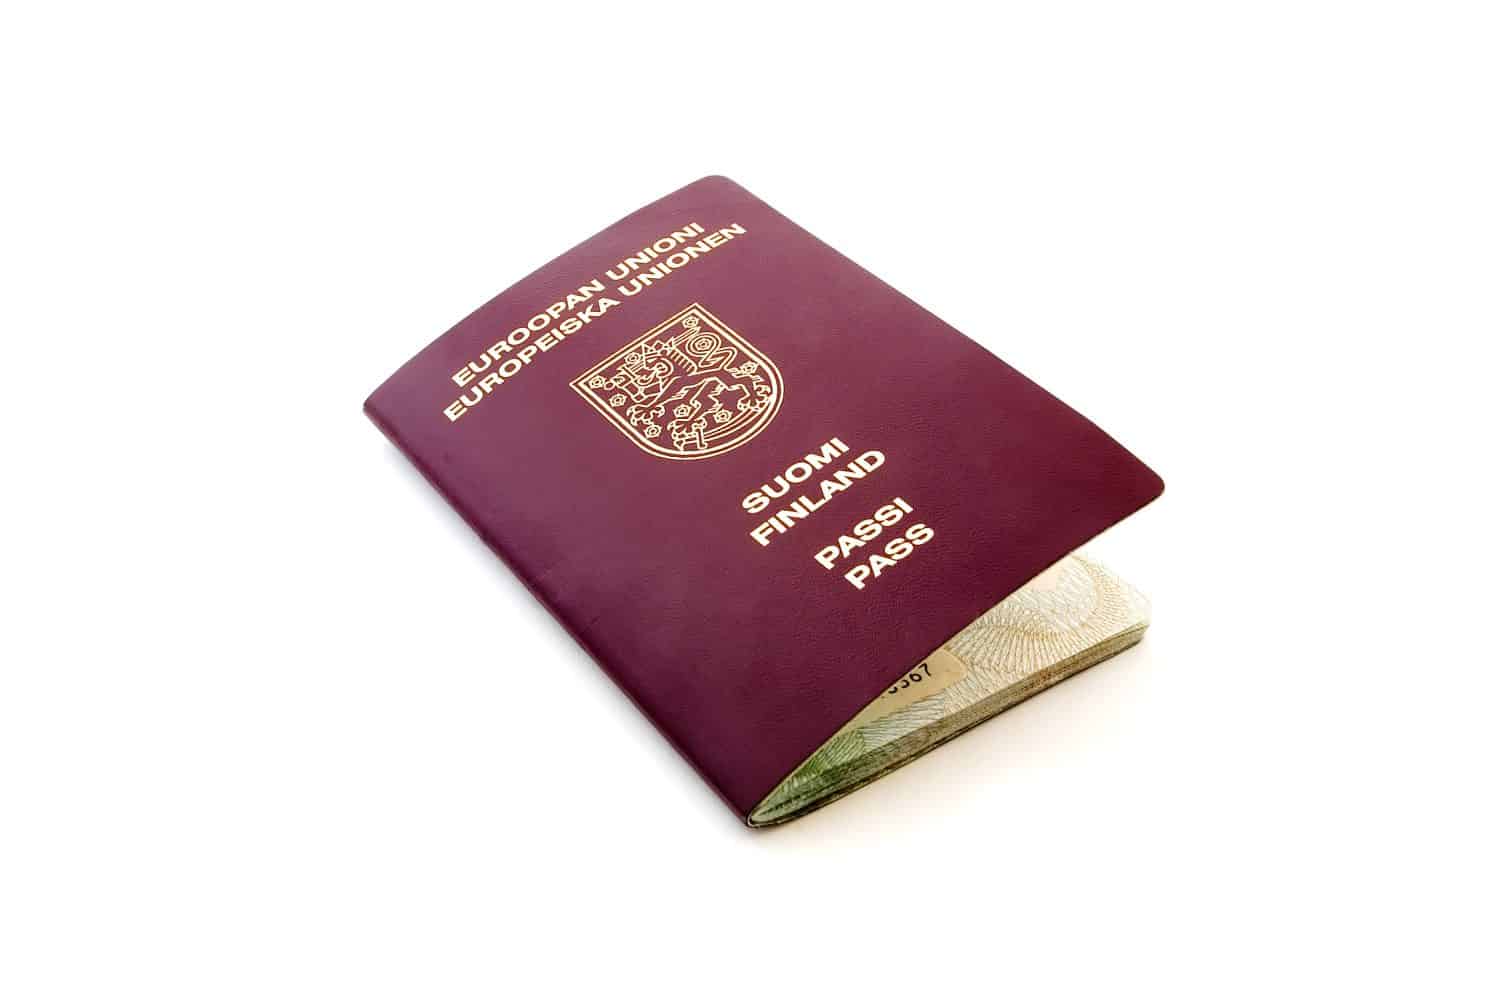 <p>The second place in the most powerful passports in the world goes to 7 countries: Austria, Finland, Ireland, Luxembourg, Netherlands, South Korea, and Sweden. Residents from neutral countries like Austria and Ireland or the Scandinavian countries like Finland and Sweden are generally well-received around the world. Second-place passports grant access to 193 countries. </p><p>Sharks, lions, alligators, and more! Don’t miss today’s latest and most exciting animal news. <strong><a href="https://www.msn.com/en-us/channel/source/AZ%20Animals%20US/sr-vid-7etr9q8xun6k6508c3nufaum0de3dqktiq6h27ddeagnfug30wka">Click here to access the A-Z Animals profile page</a> and be sure to hit the <em>Follow</em> button here or at the top of this article!</strong></p> <p>Have feedback? Add a comment below!</p>